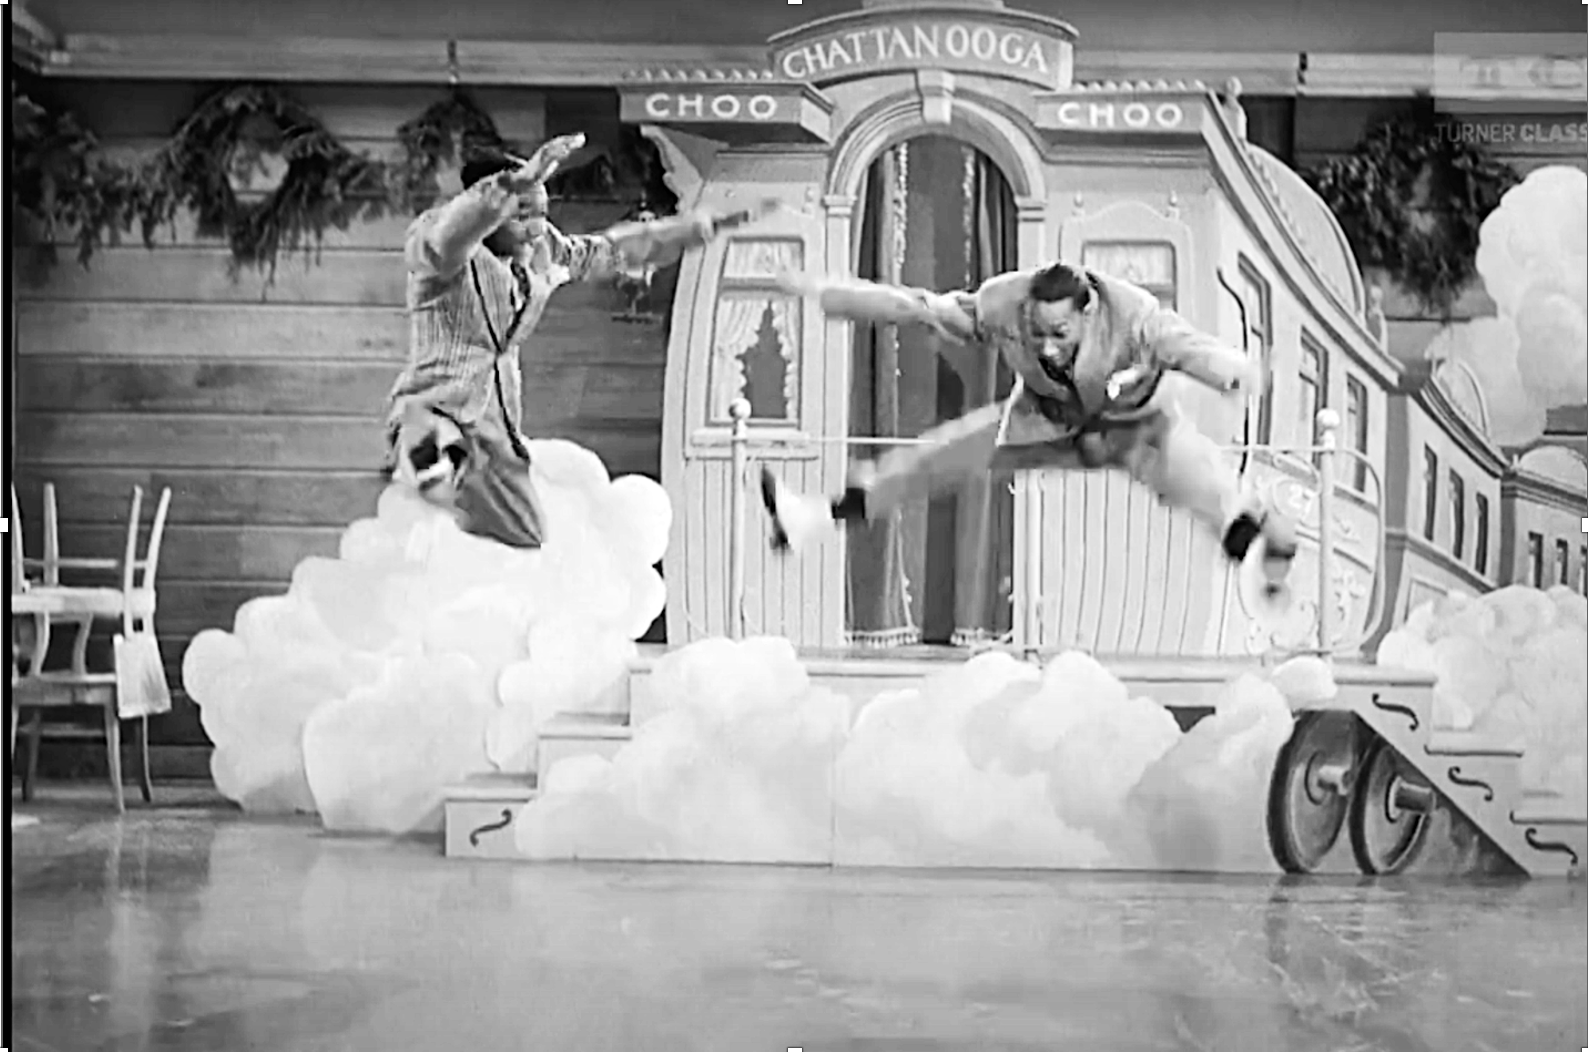 Riding the rhythm, the Nicholas brothers best tap dancers of all times shown here in mid-air